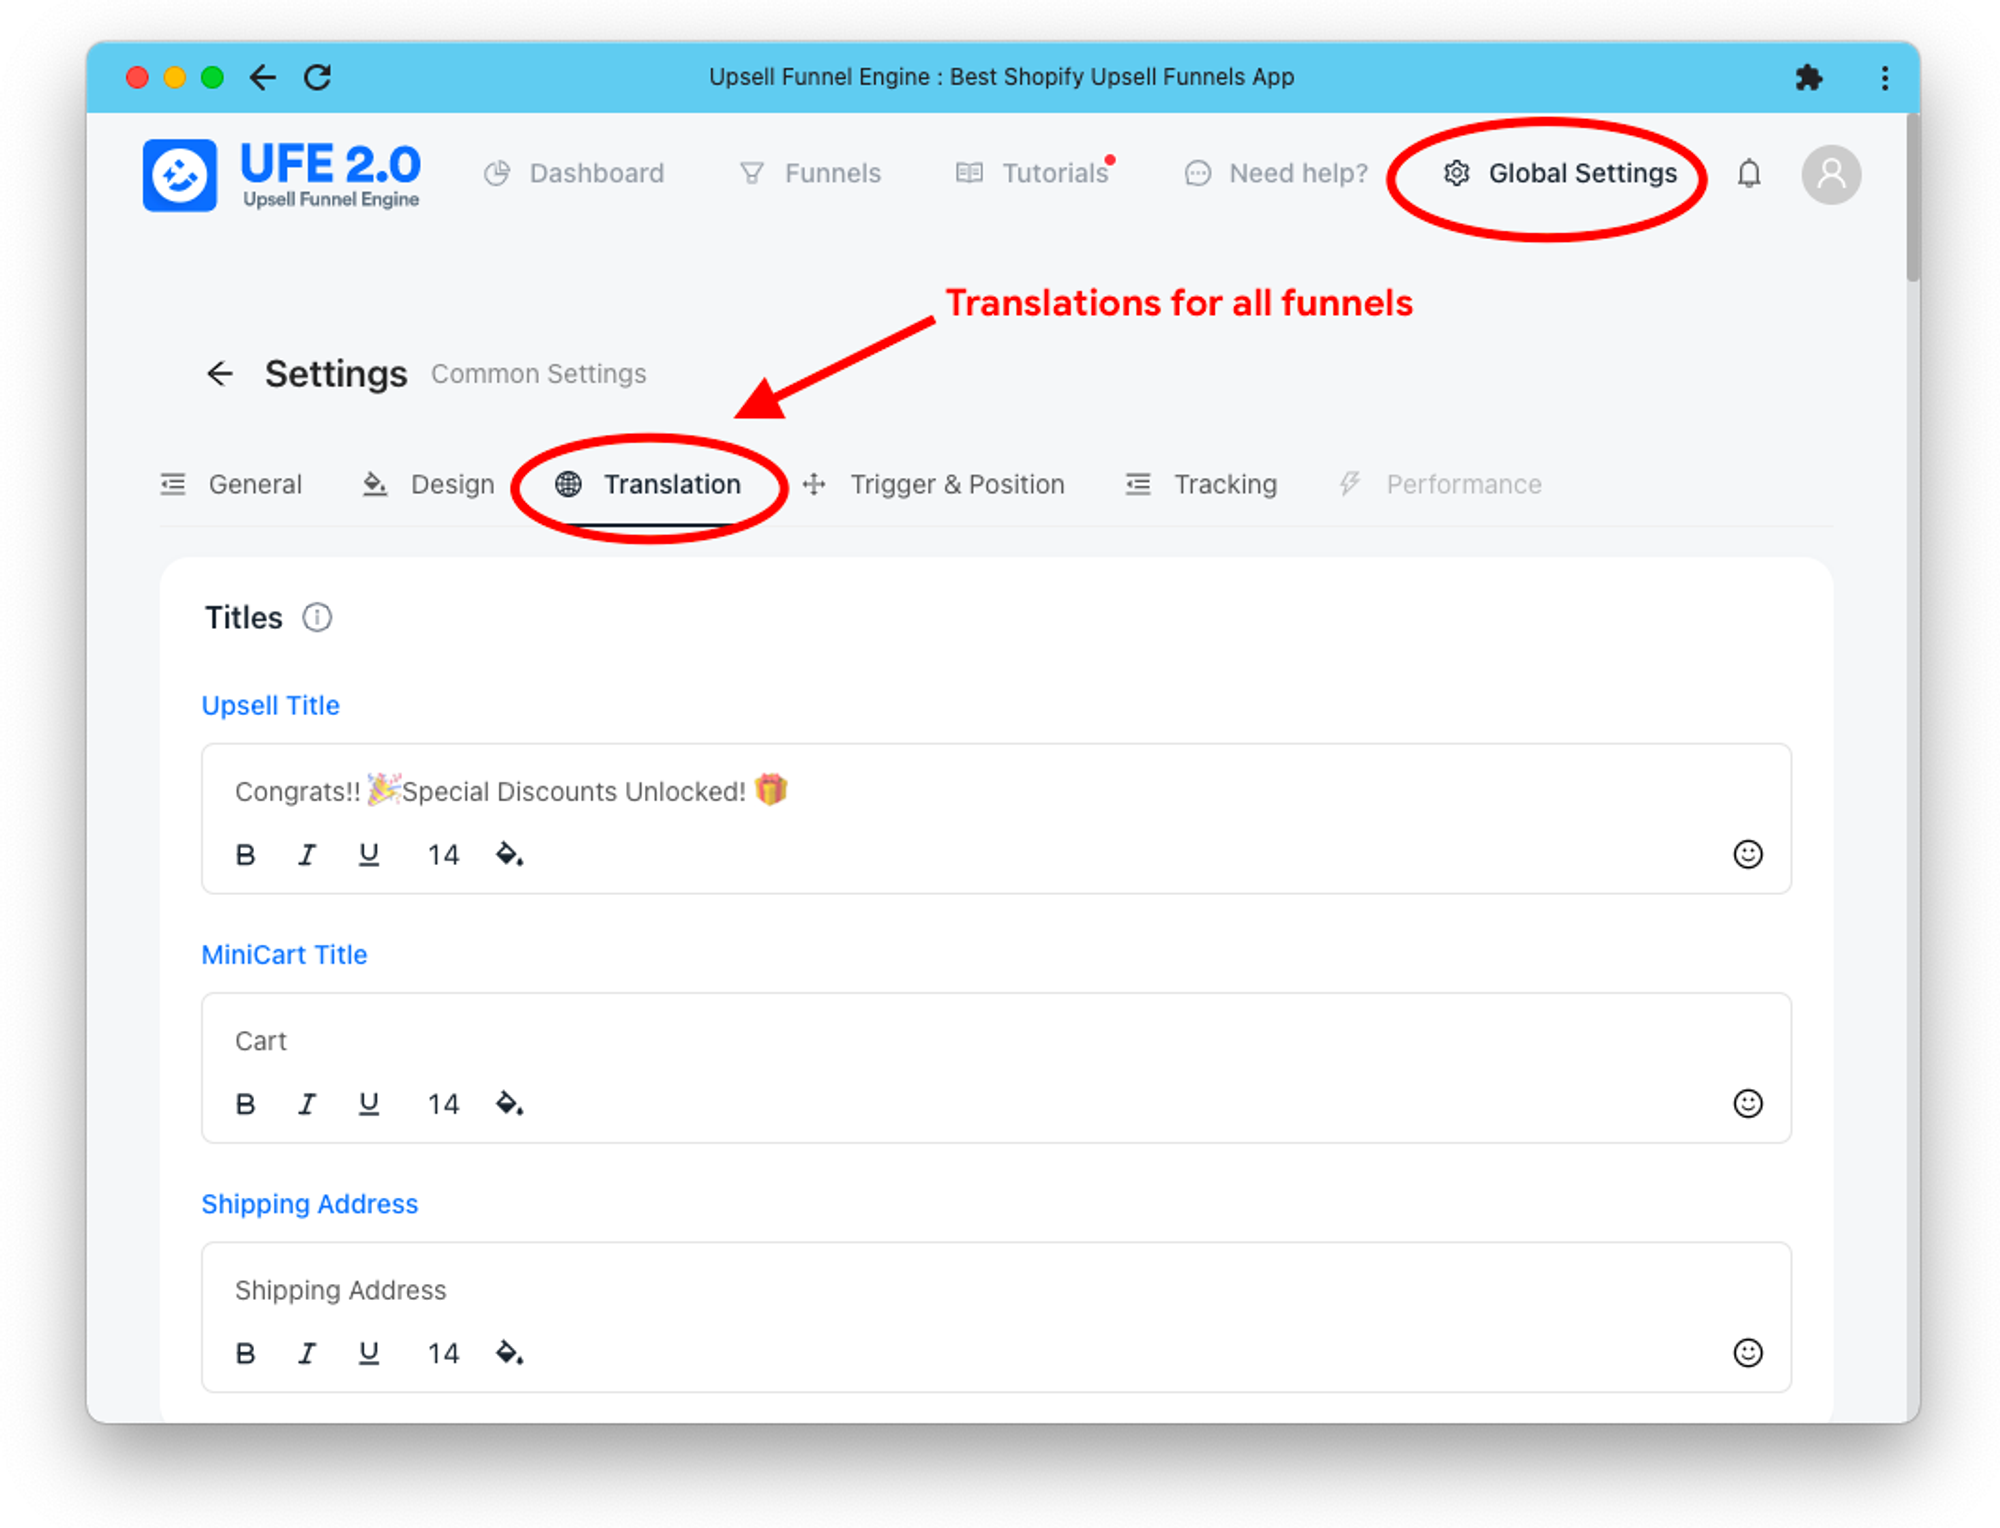 Global Translations in Upsell Funnel Engine App